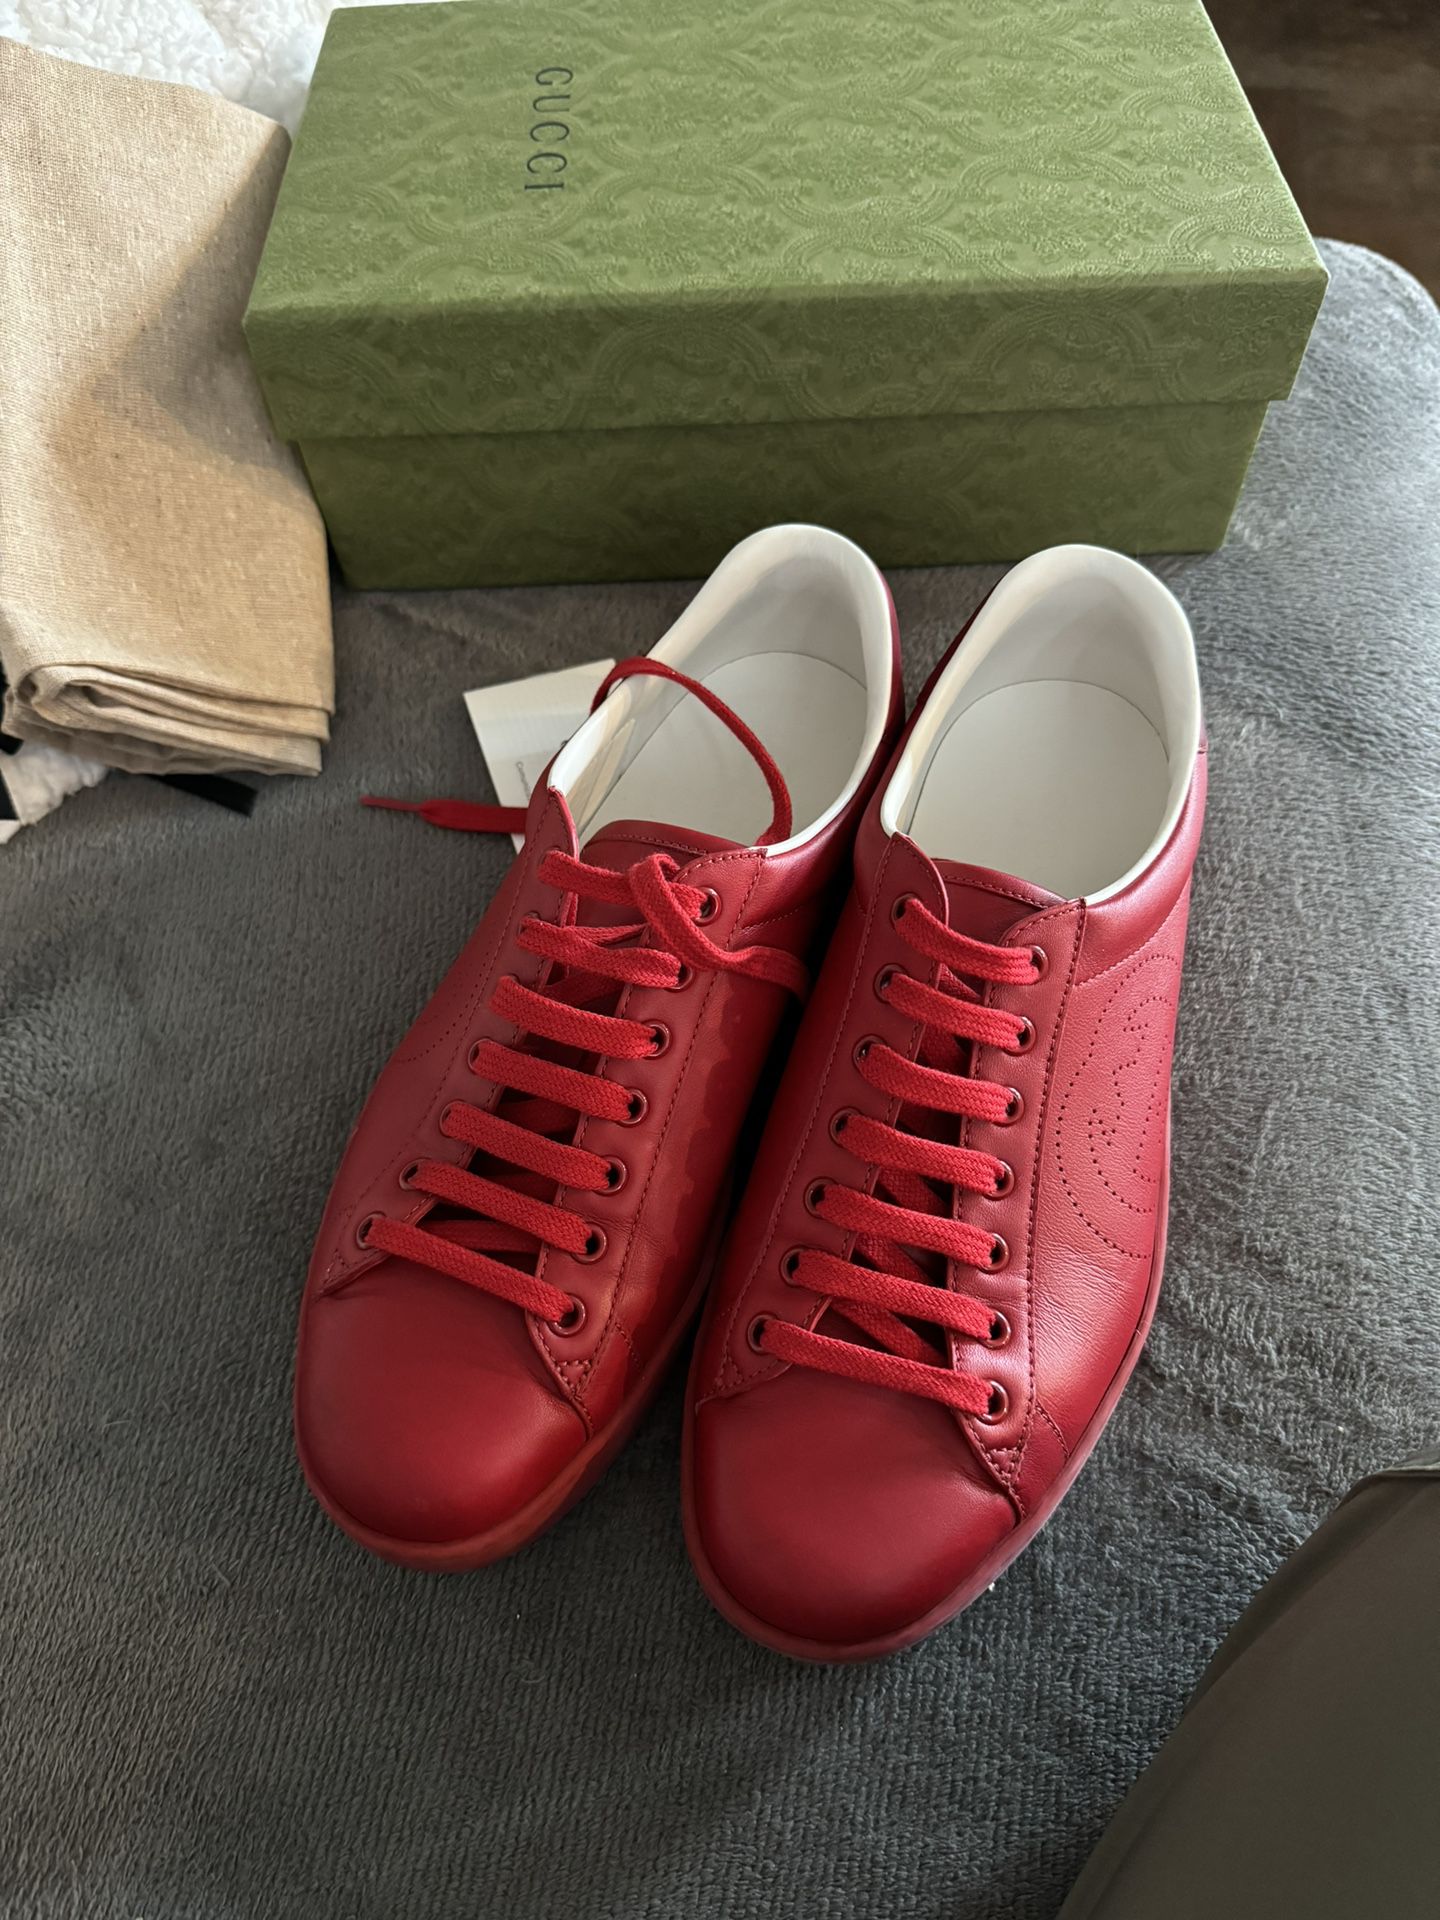 Gucci Ace Red Sneakers Gucci 8 Us MEN 9